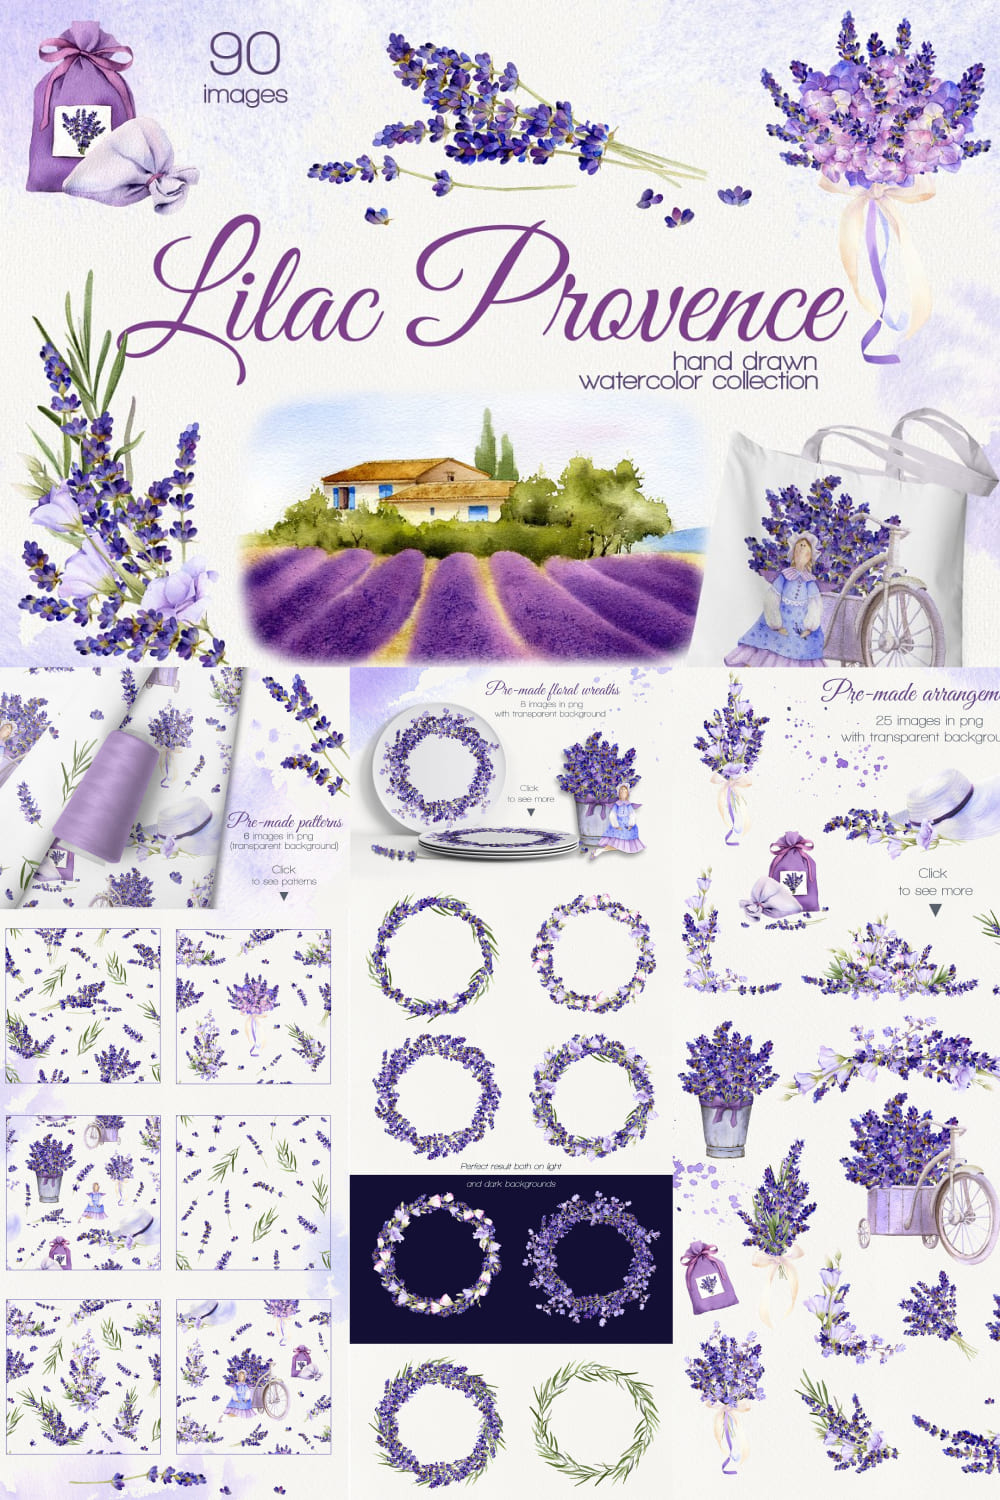 Lilac Provence Watercolor Collection pinterest image.